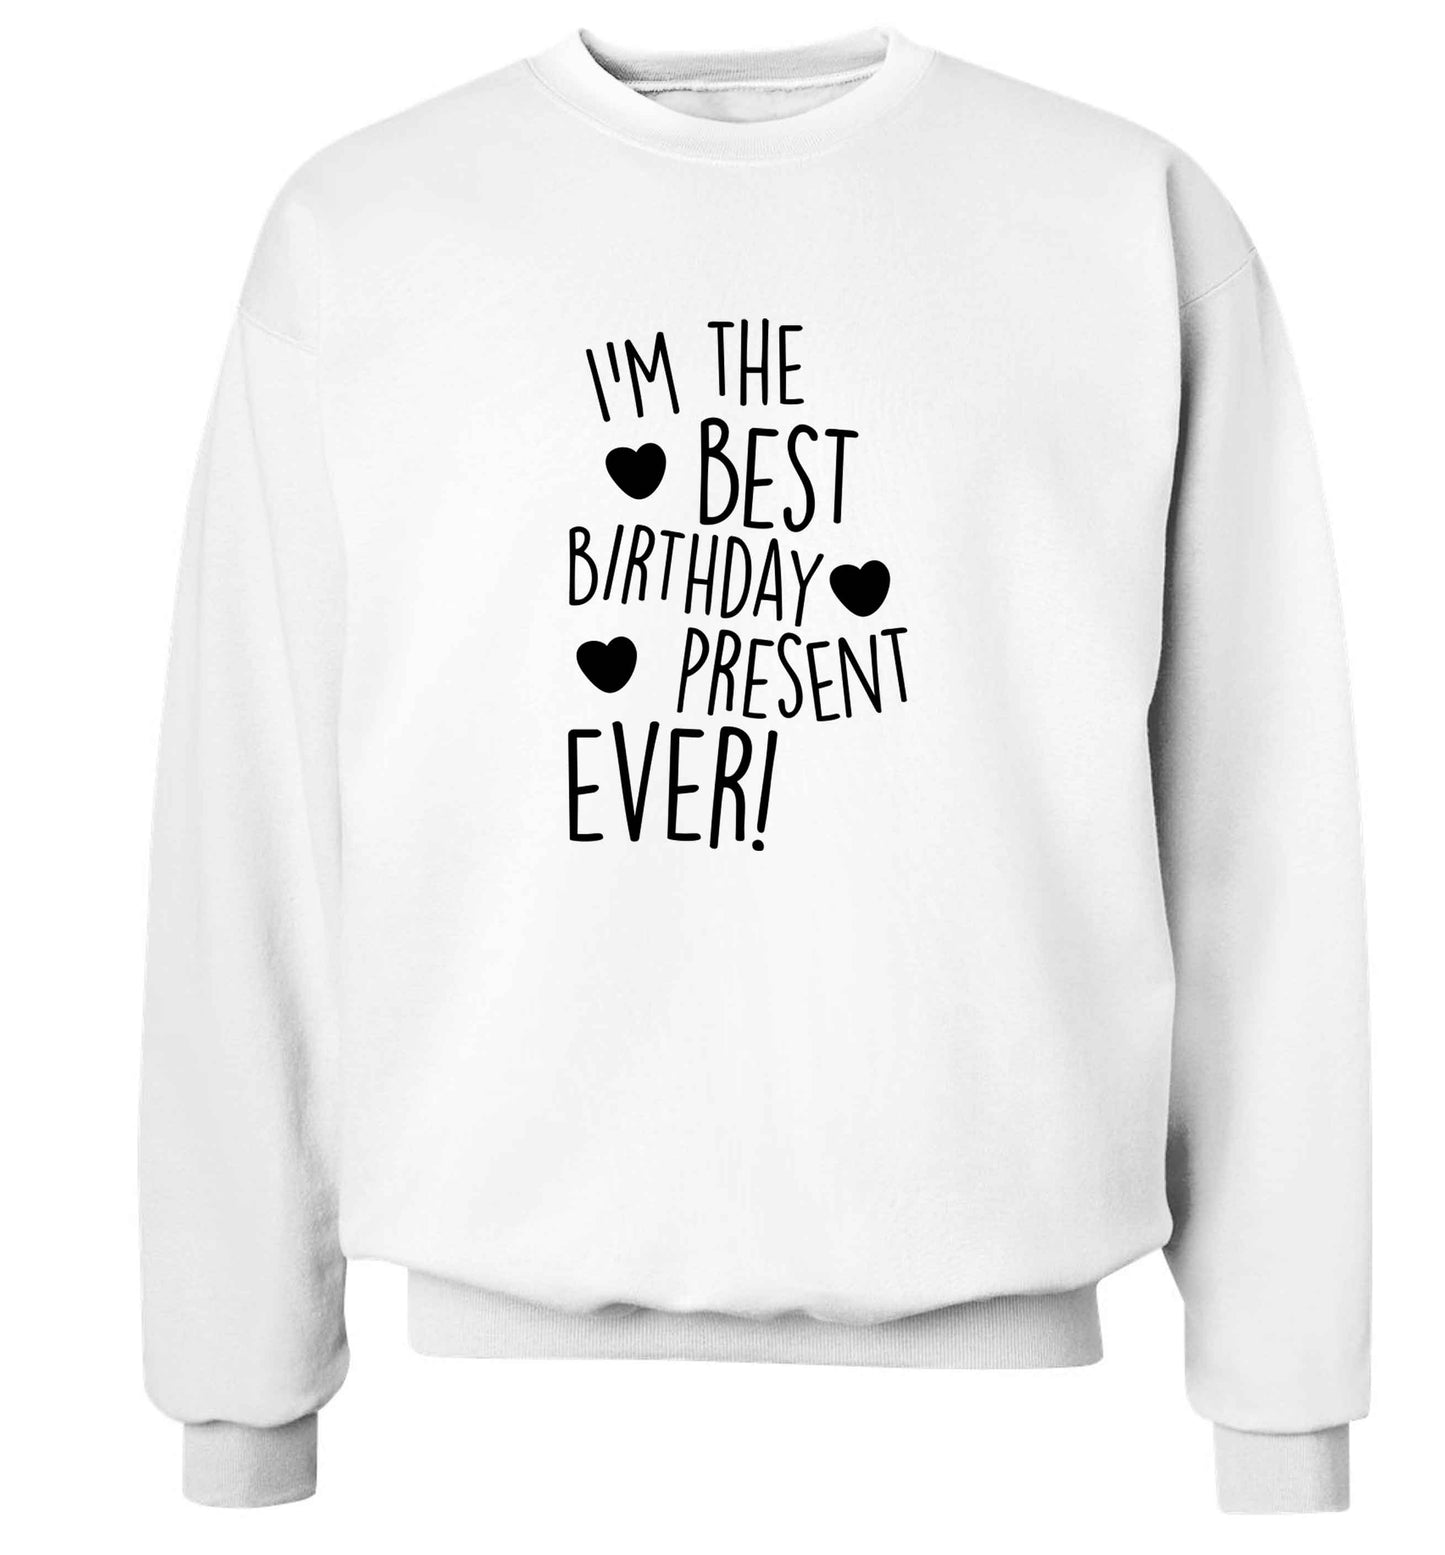 I'm the best birthday present ever adult's unisex white sweater 2XL